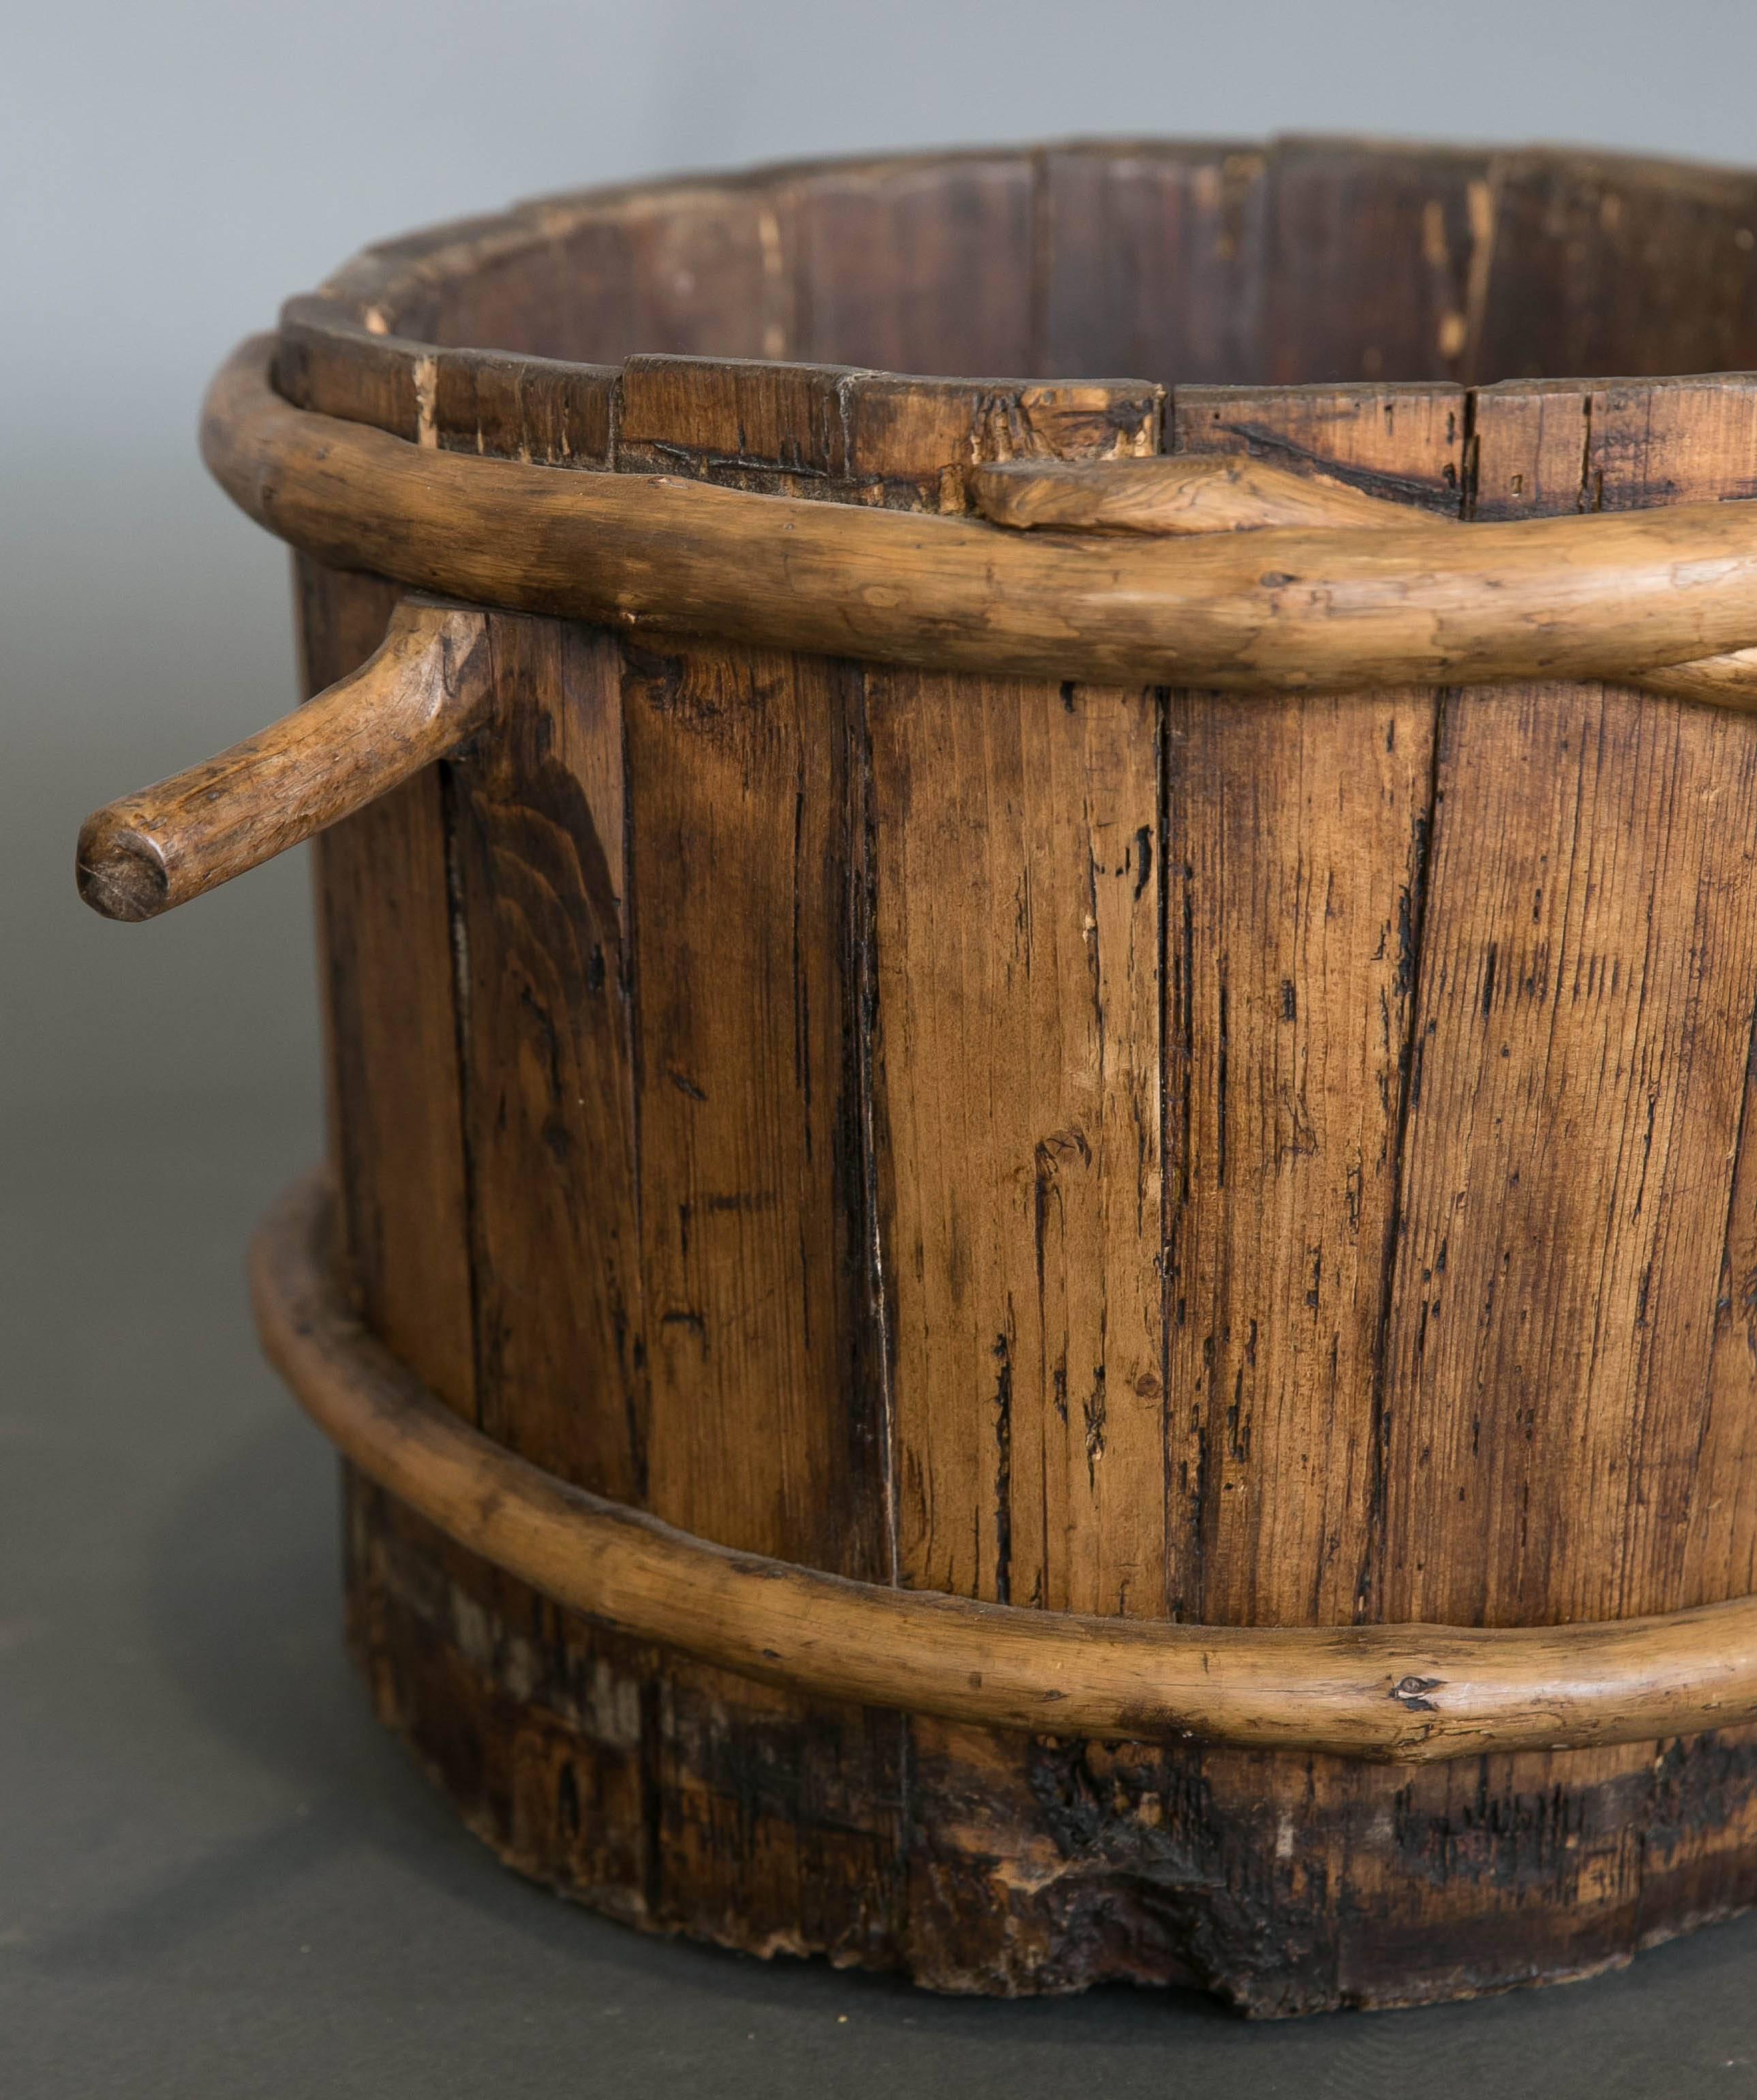 19th century wooden measuring container.